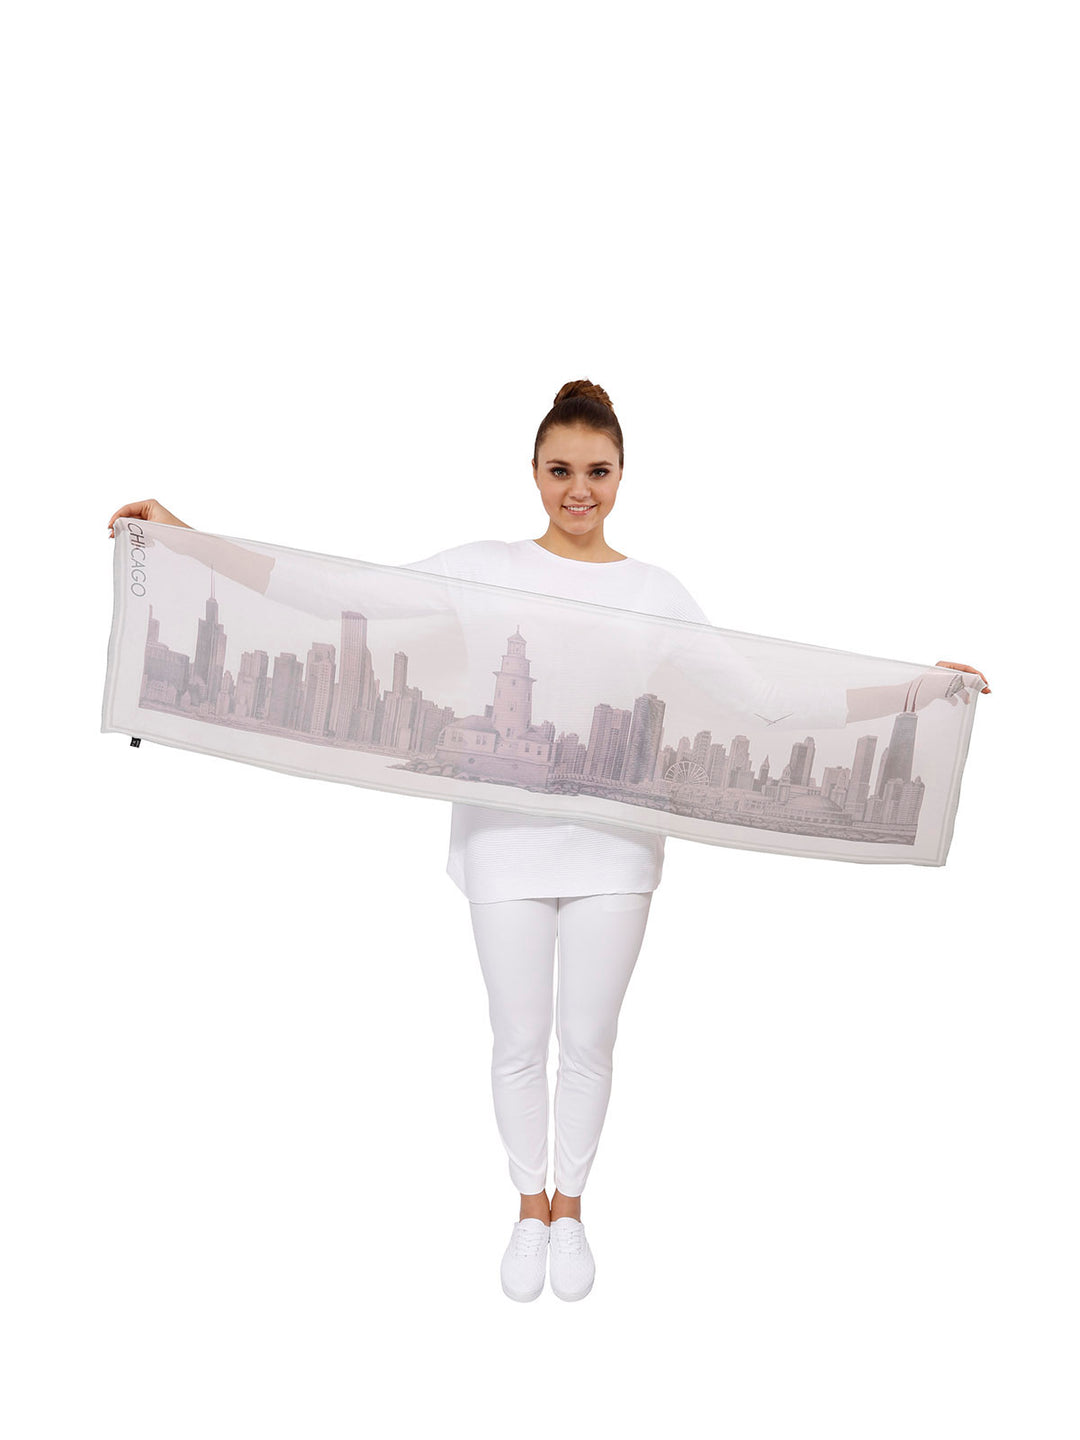 Unique Chicago Skyline Gifts Business Souvenirs How To Wear Long Silk Scarf Chicago Skyline Luxury Gifts Pure Silk Art Scarves by Alesia Chaika Chicago Fashion Designer